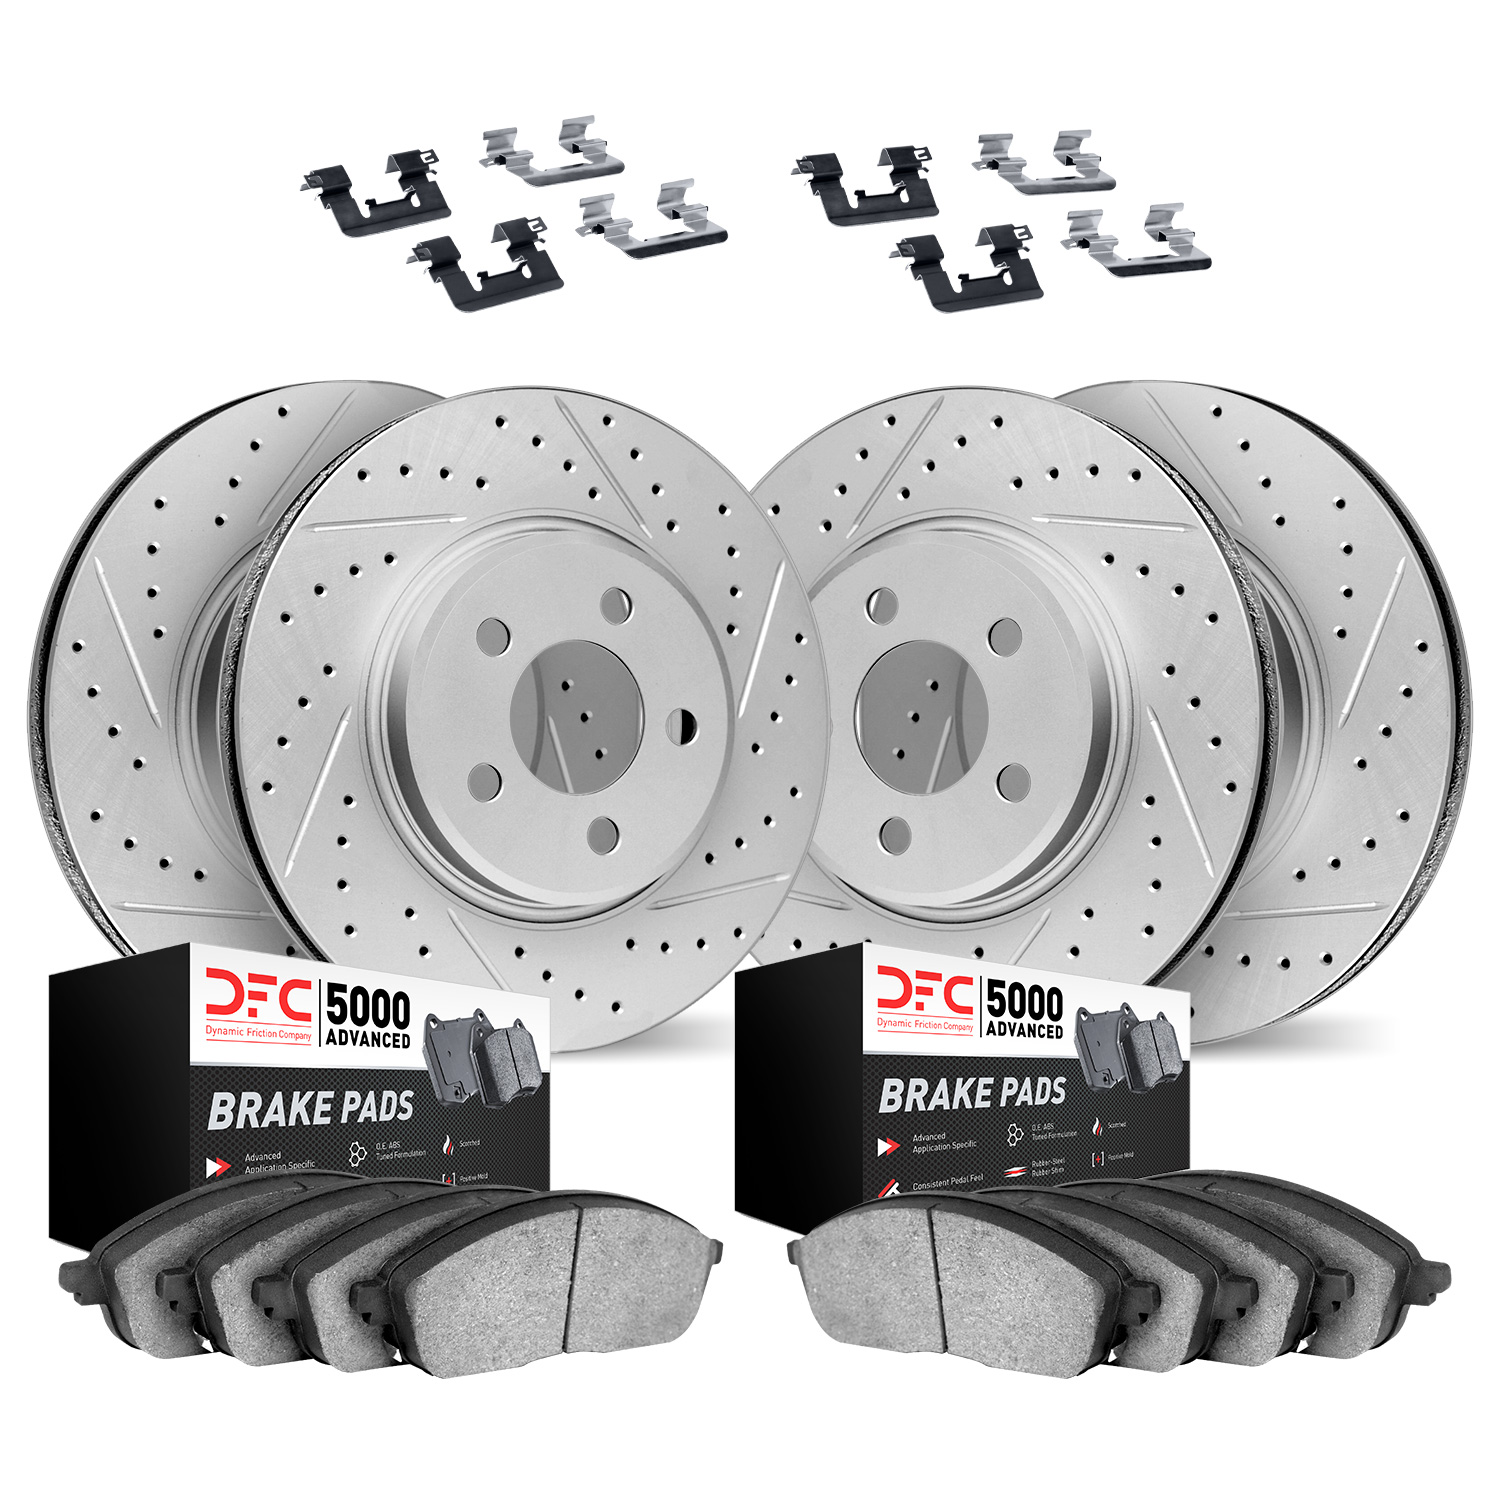 2514-42074 Geoperformance Drilled/Slotted Rotors w/5000 Advanced Brake Pads Kit & Hardware, Fits Select Mopar, Position: Front a